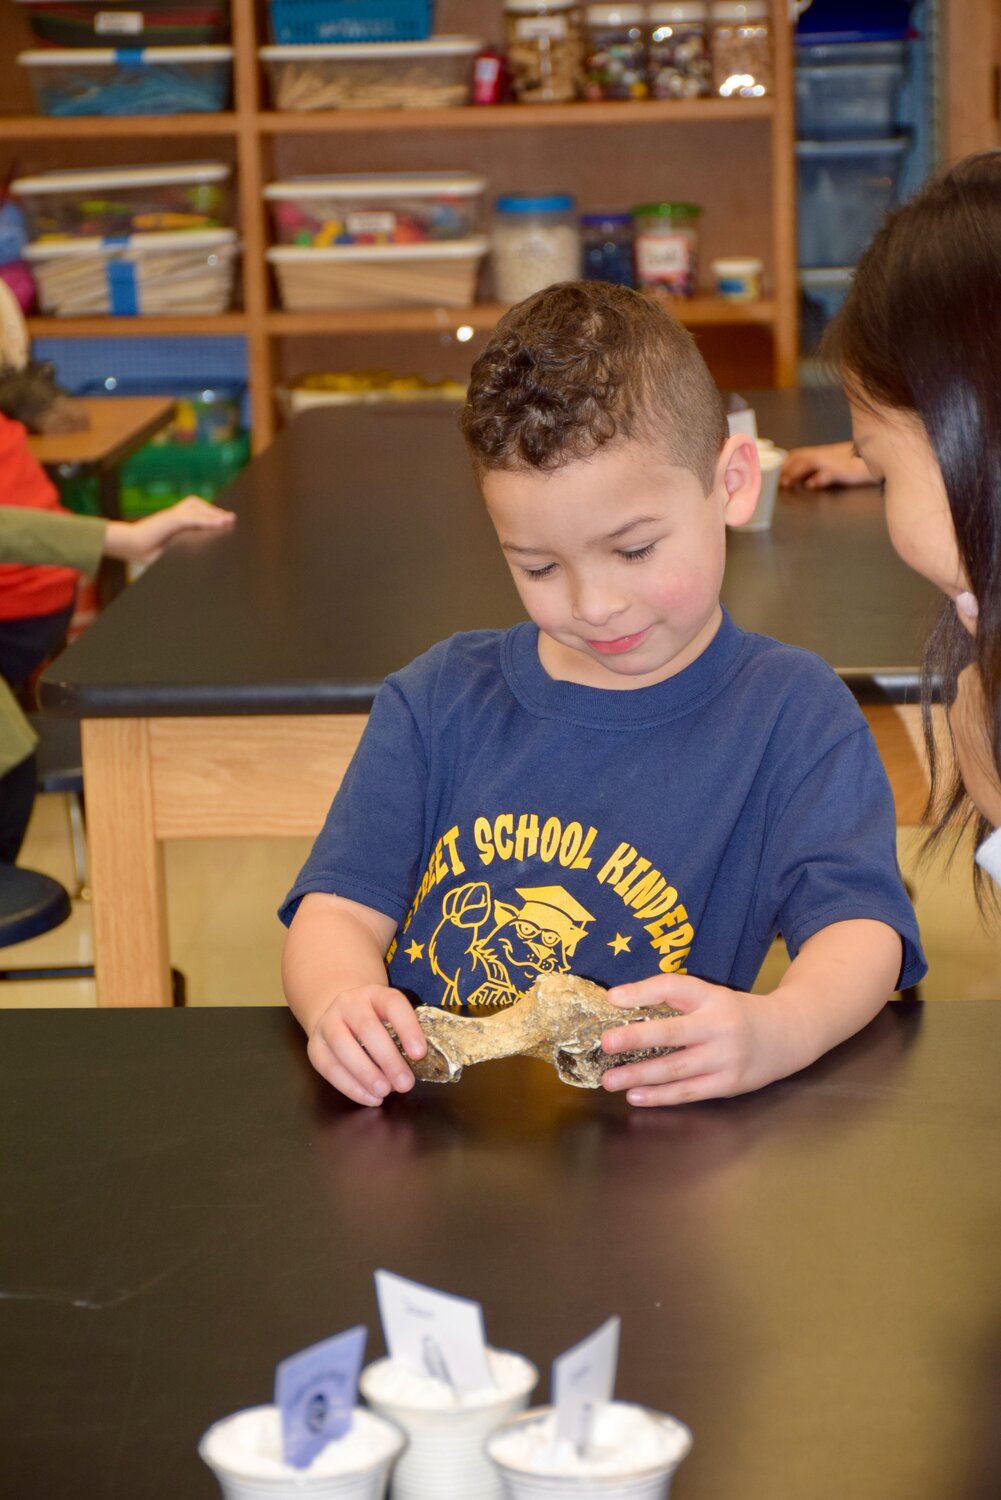 A Franklin Square student gets hands-on experience with a dinosaur fossil during math and science experience week at Franklin Square’s John Street School.